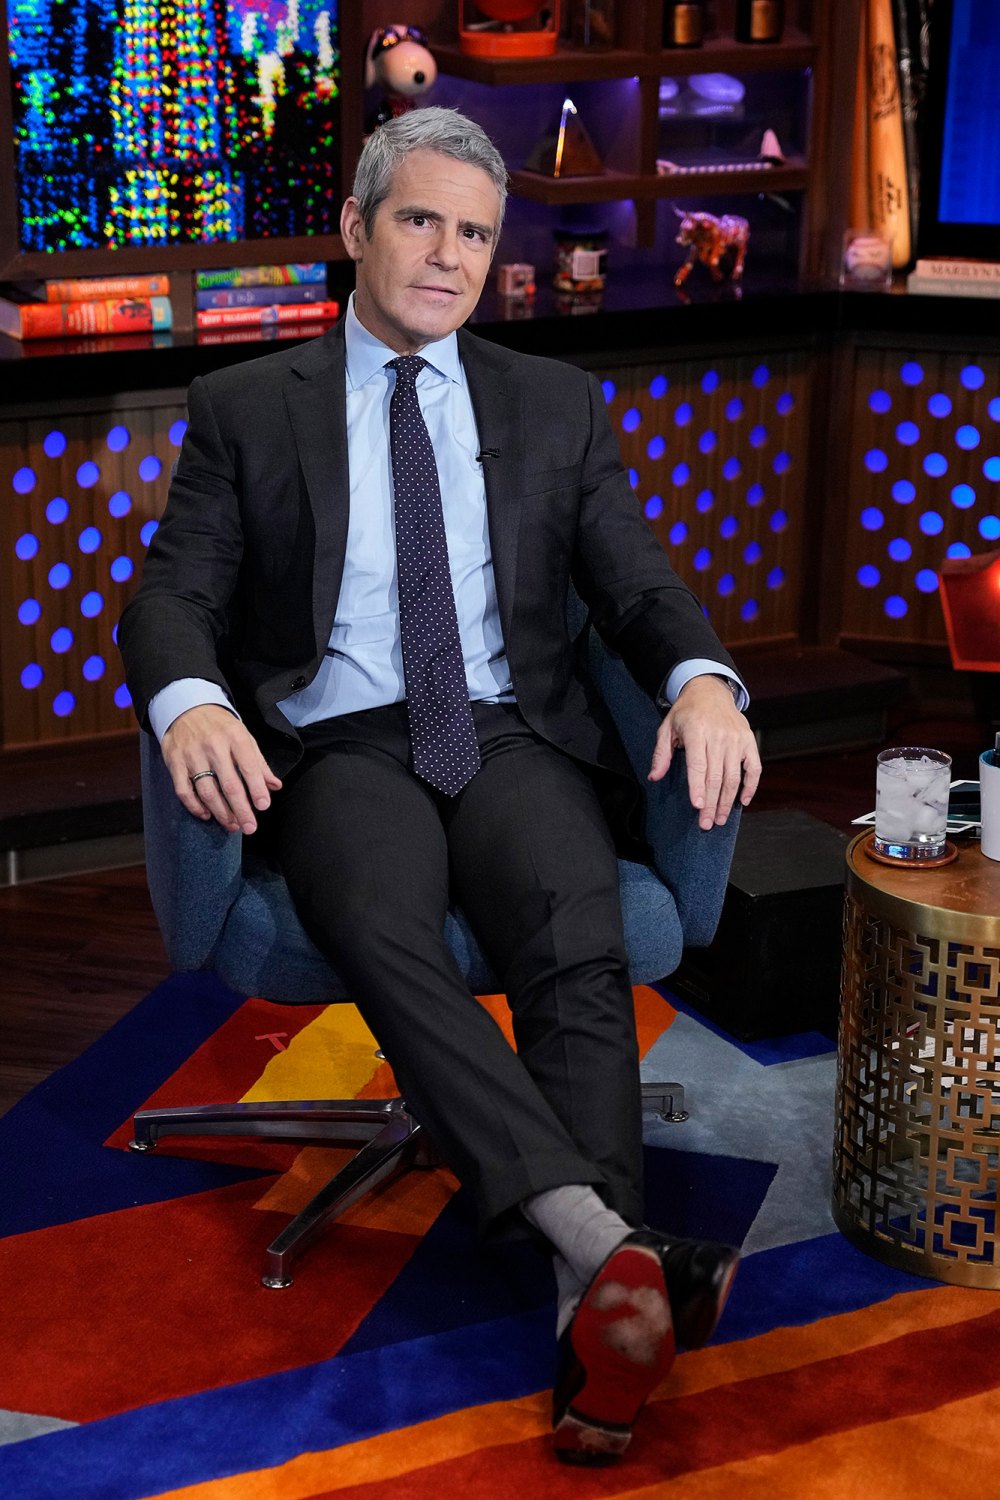 Andy Cohen Doesn't Think Jen Shah Will Be Back for 'RHOSLC' Season 3- 'Talk to the Judge' 553 Watch What Happens Live With Andy Cohen - Season 19